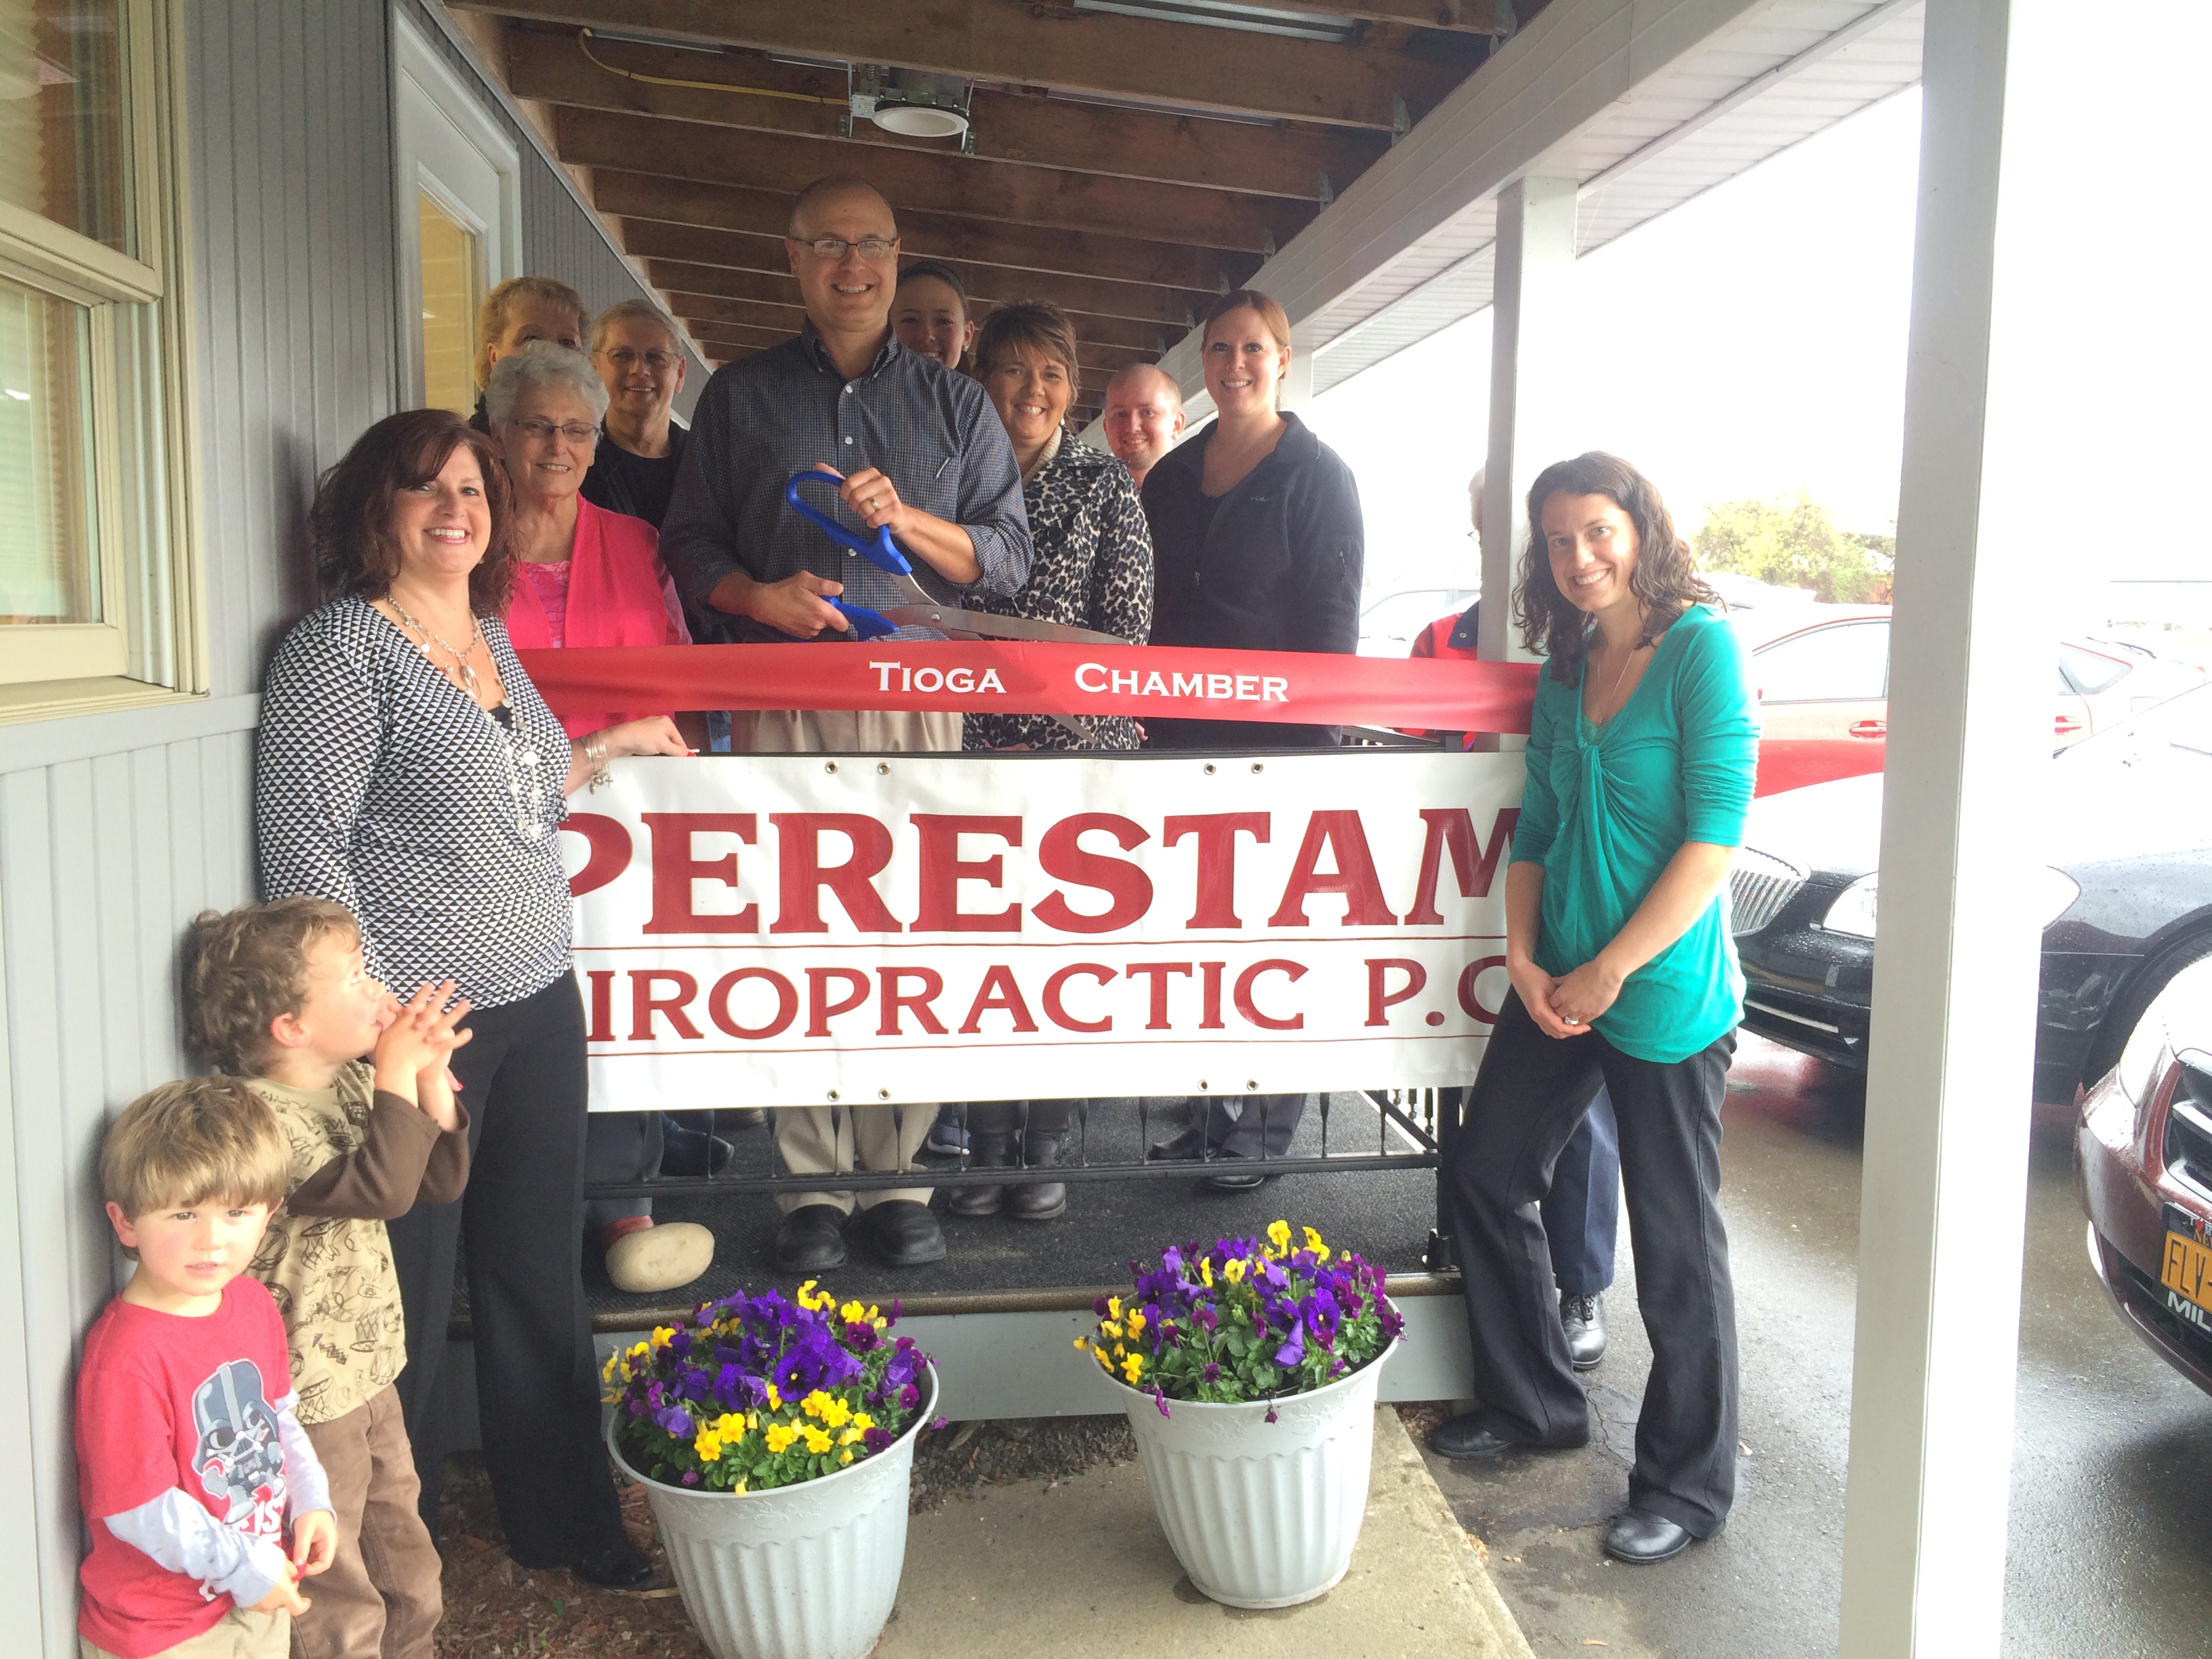 Ribbon Cutting welcomes Perestam Chiropractic to their new location